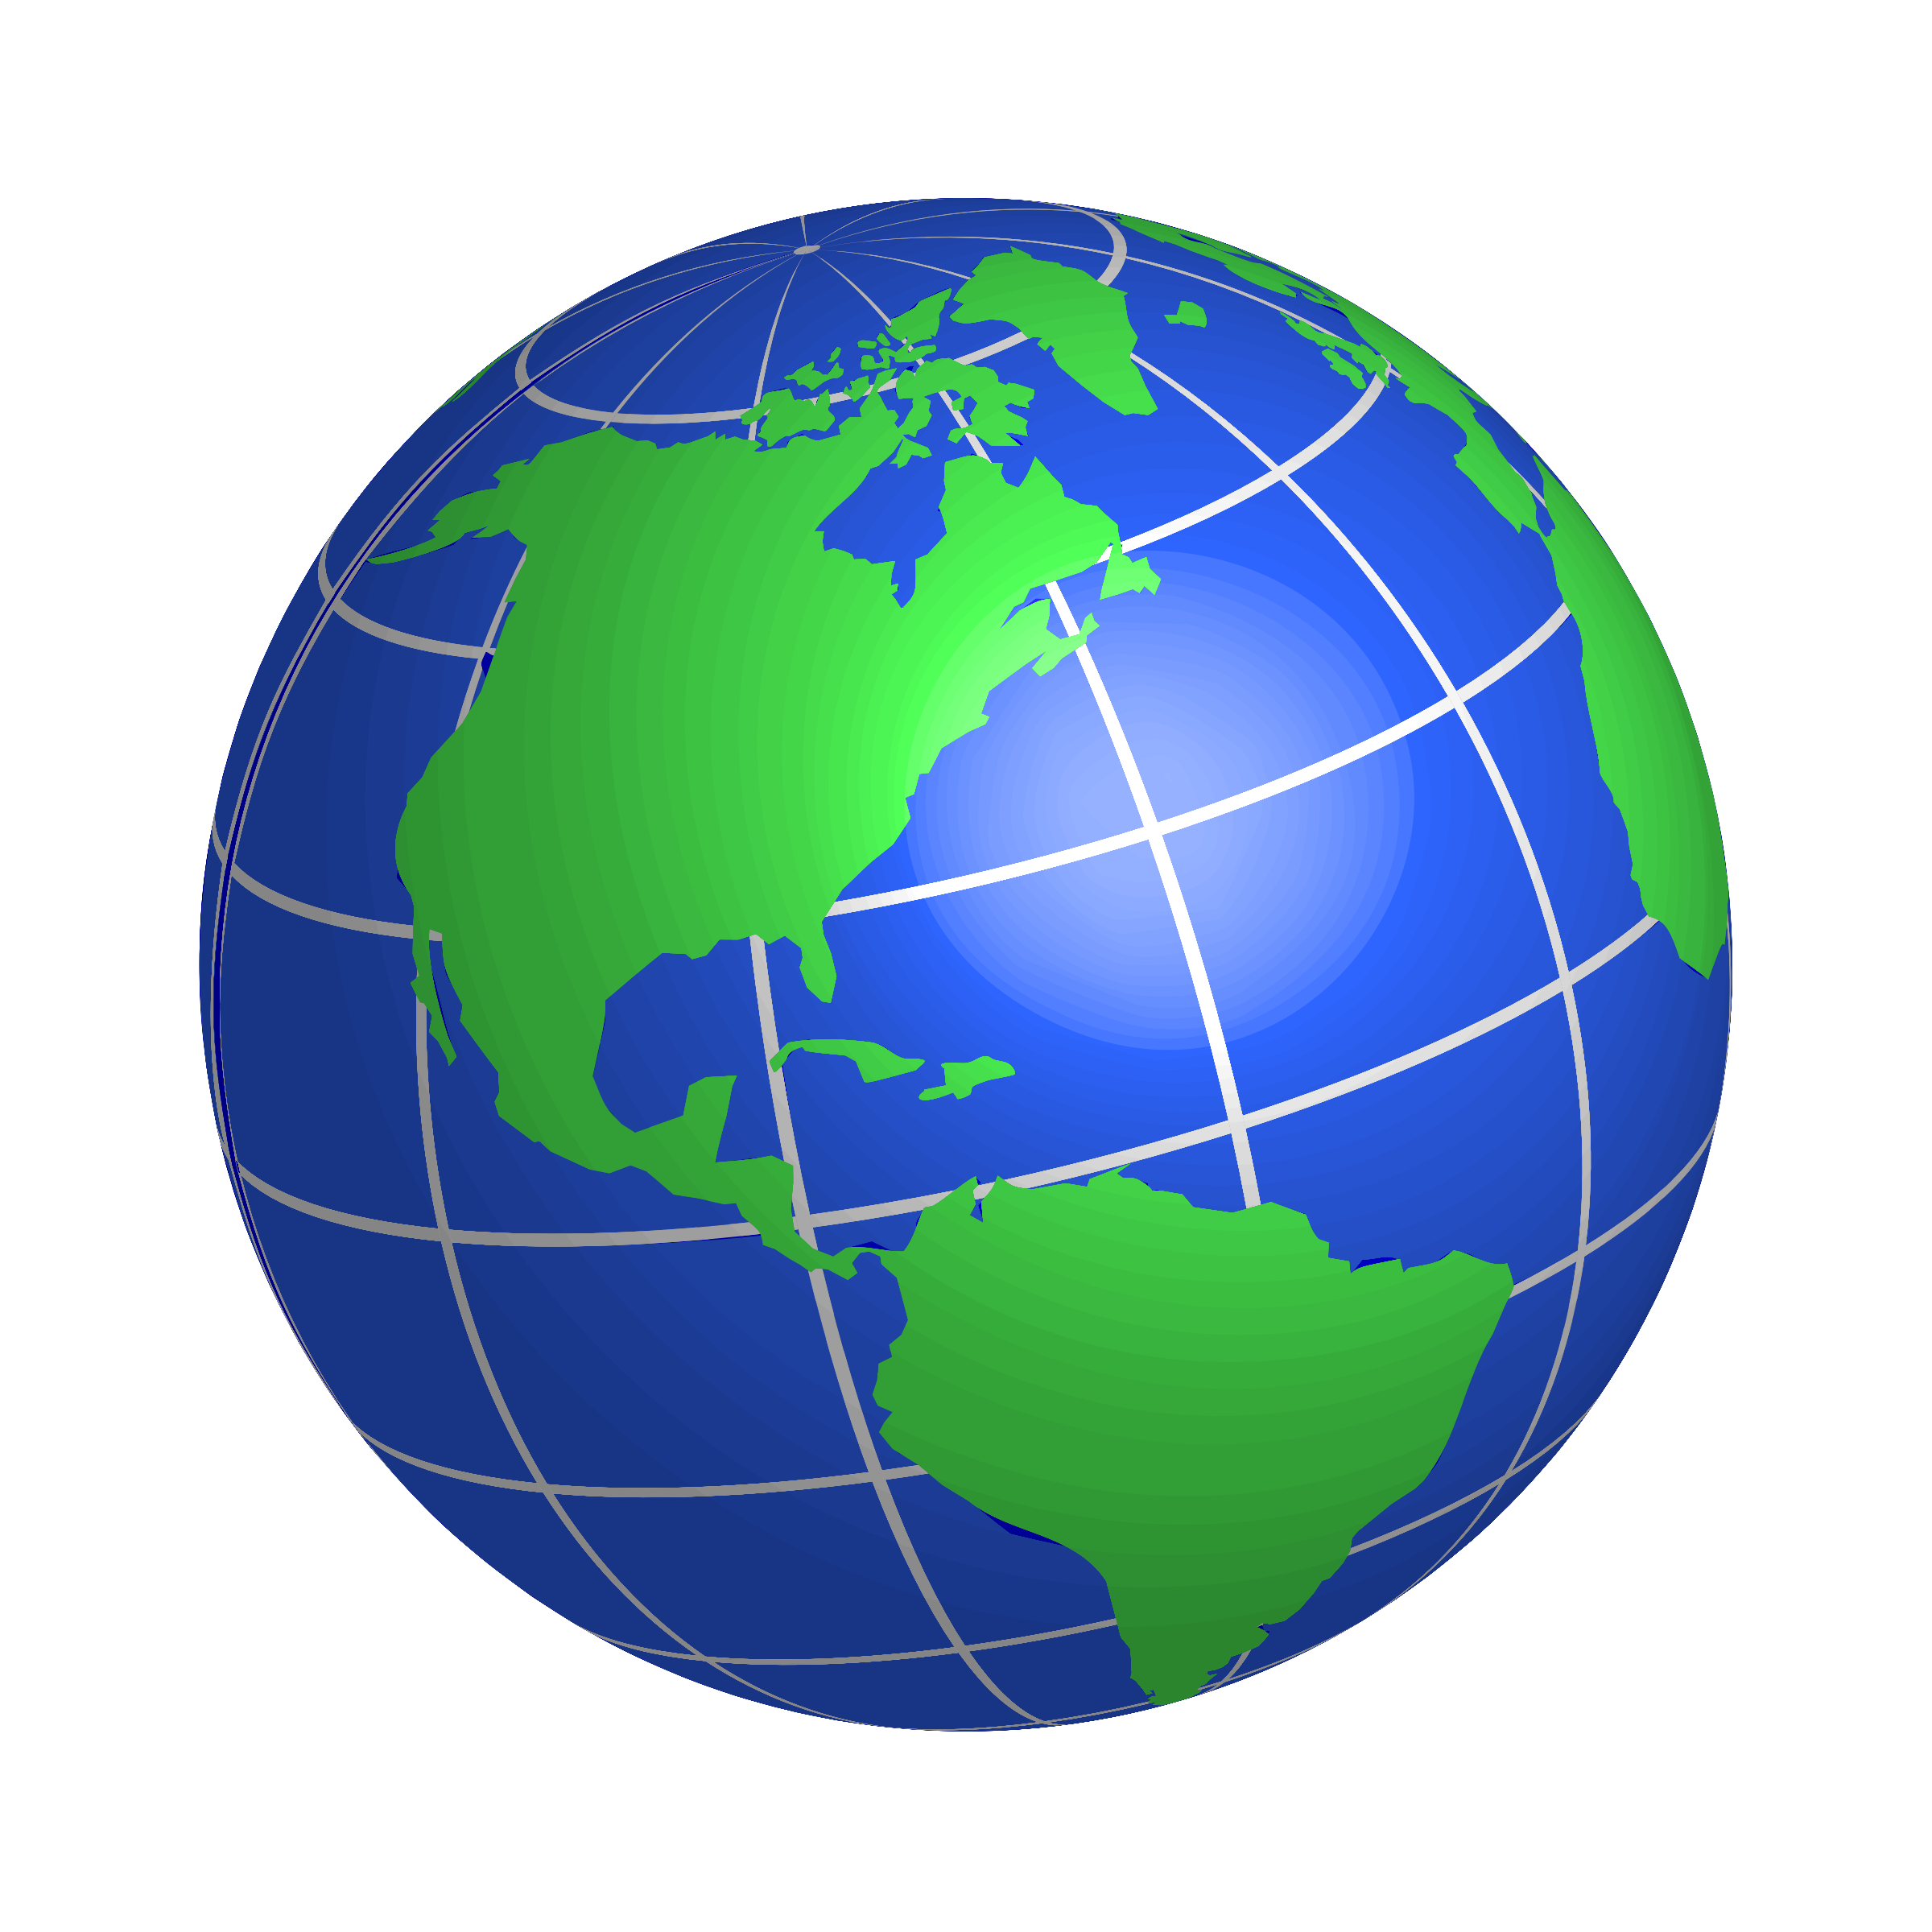 World clip art globe free clipart images